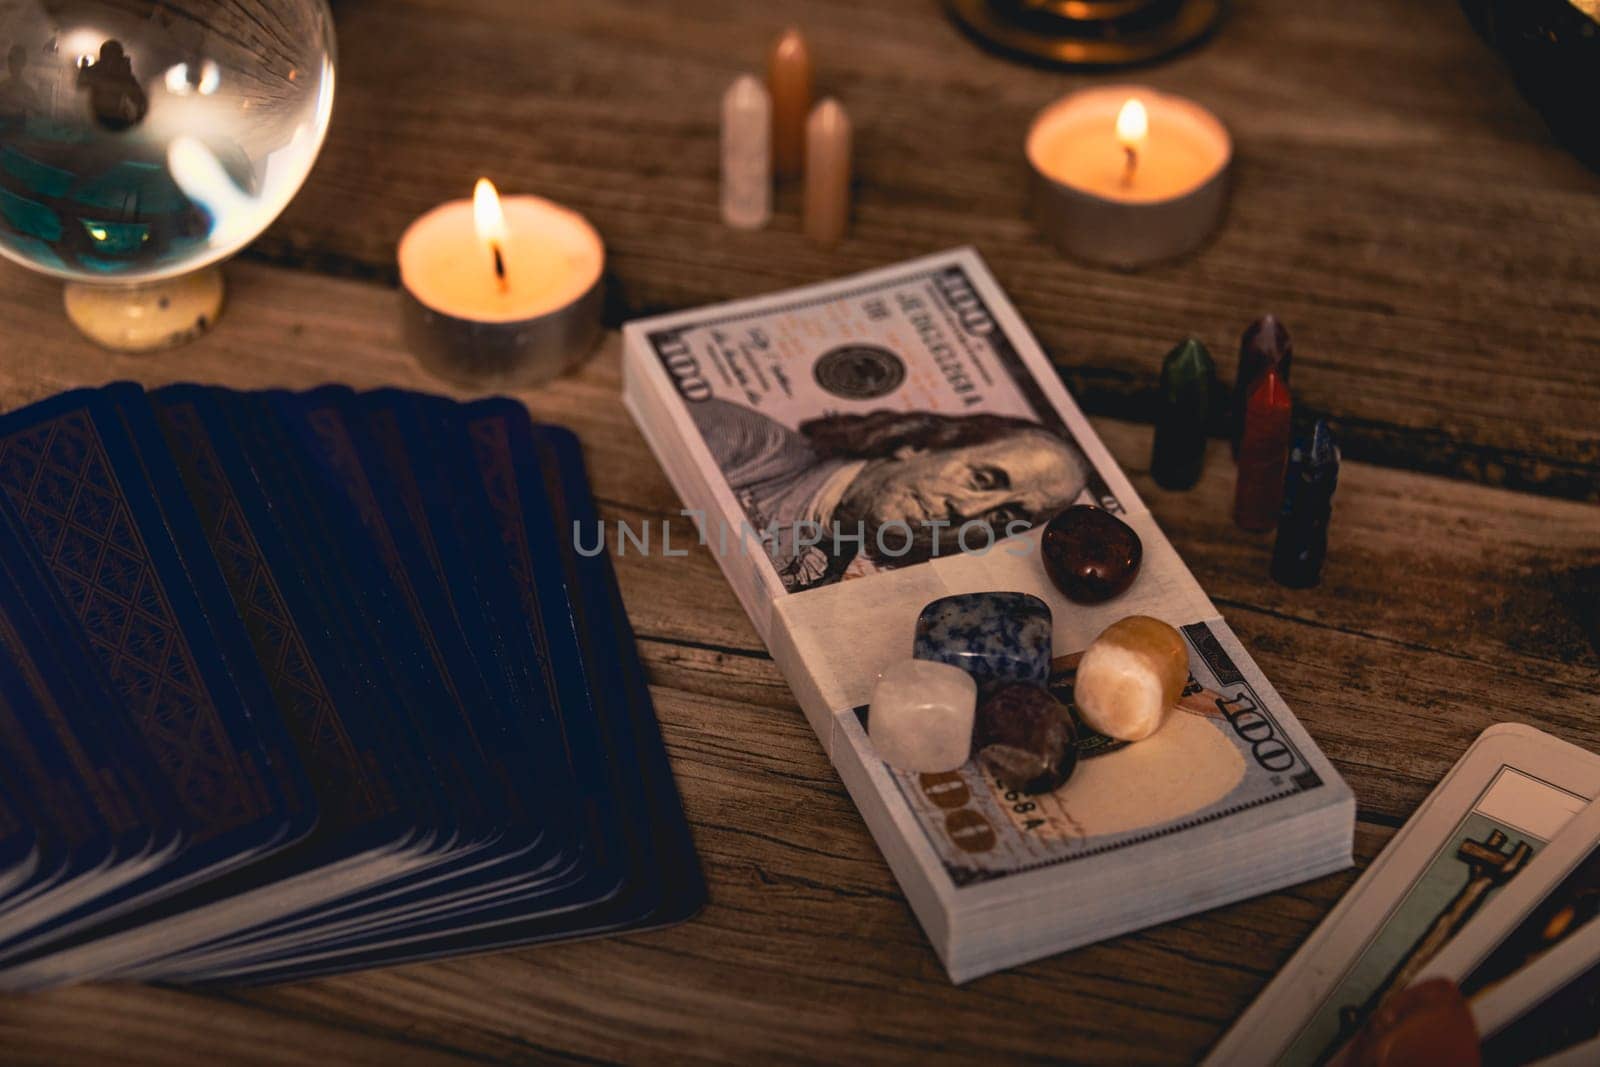 A tarot spread with The Fool card, hundred-dollar bills, and various crystals on a rustic wooden background with candles